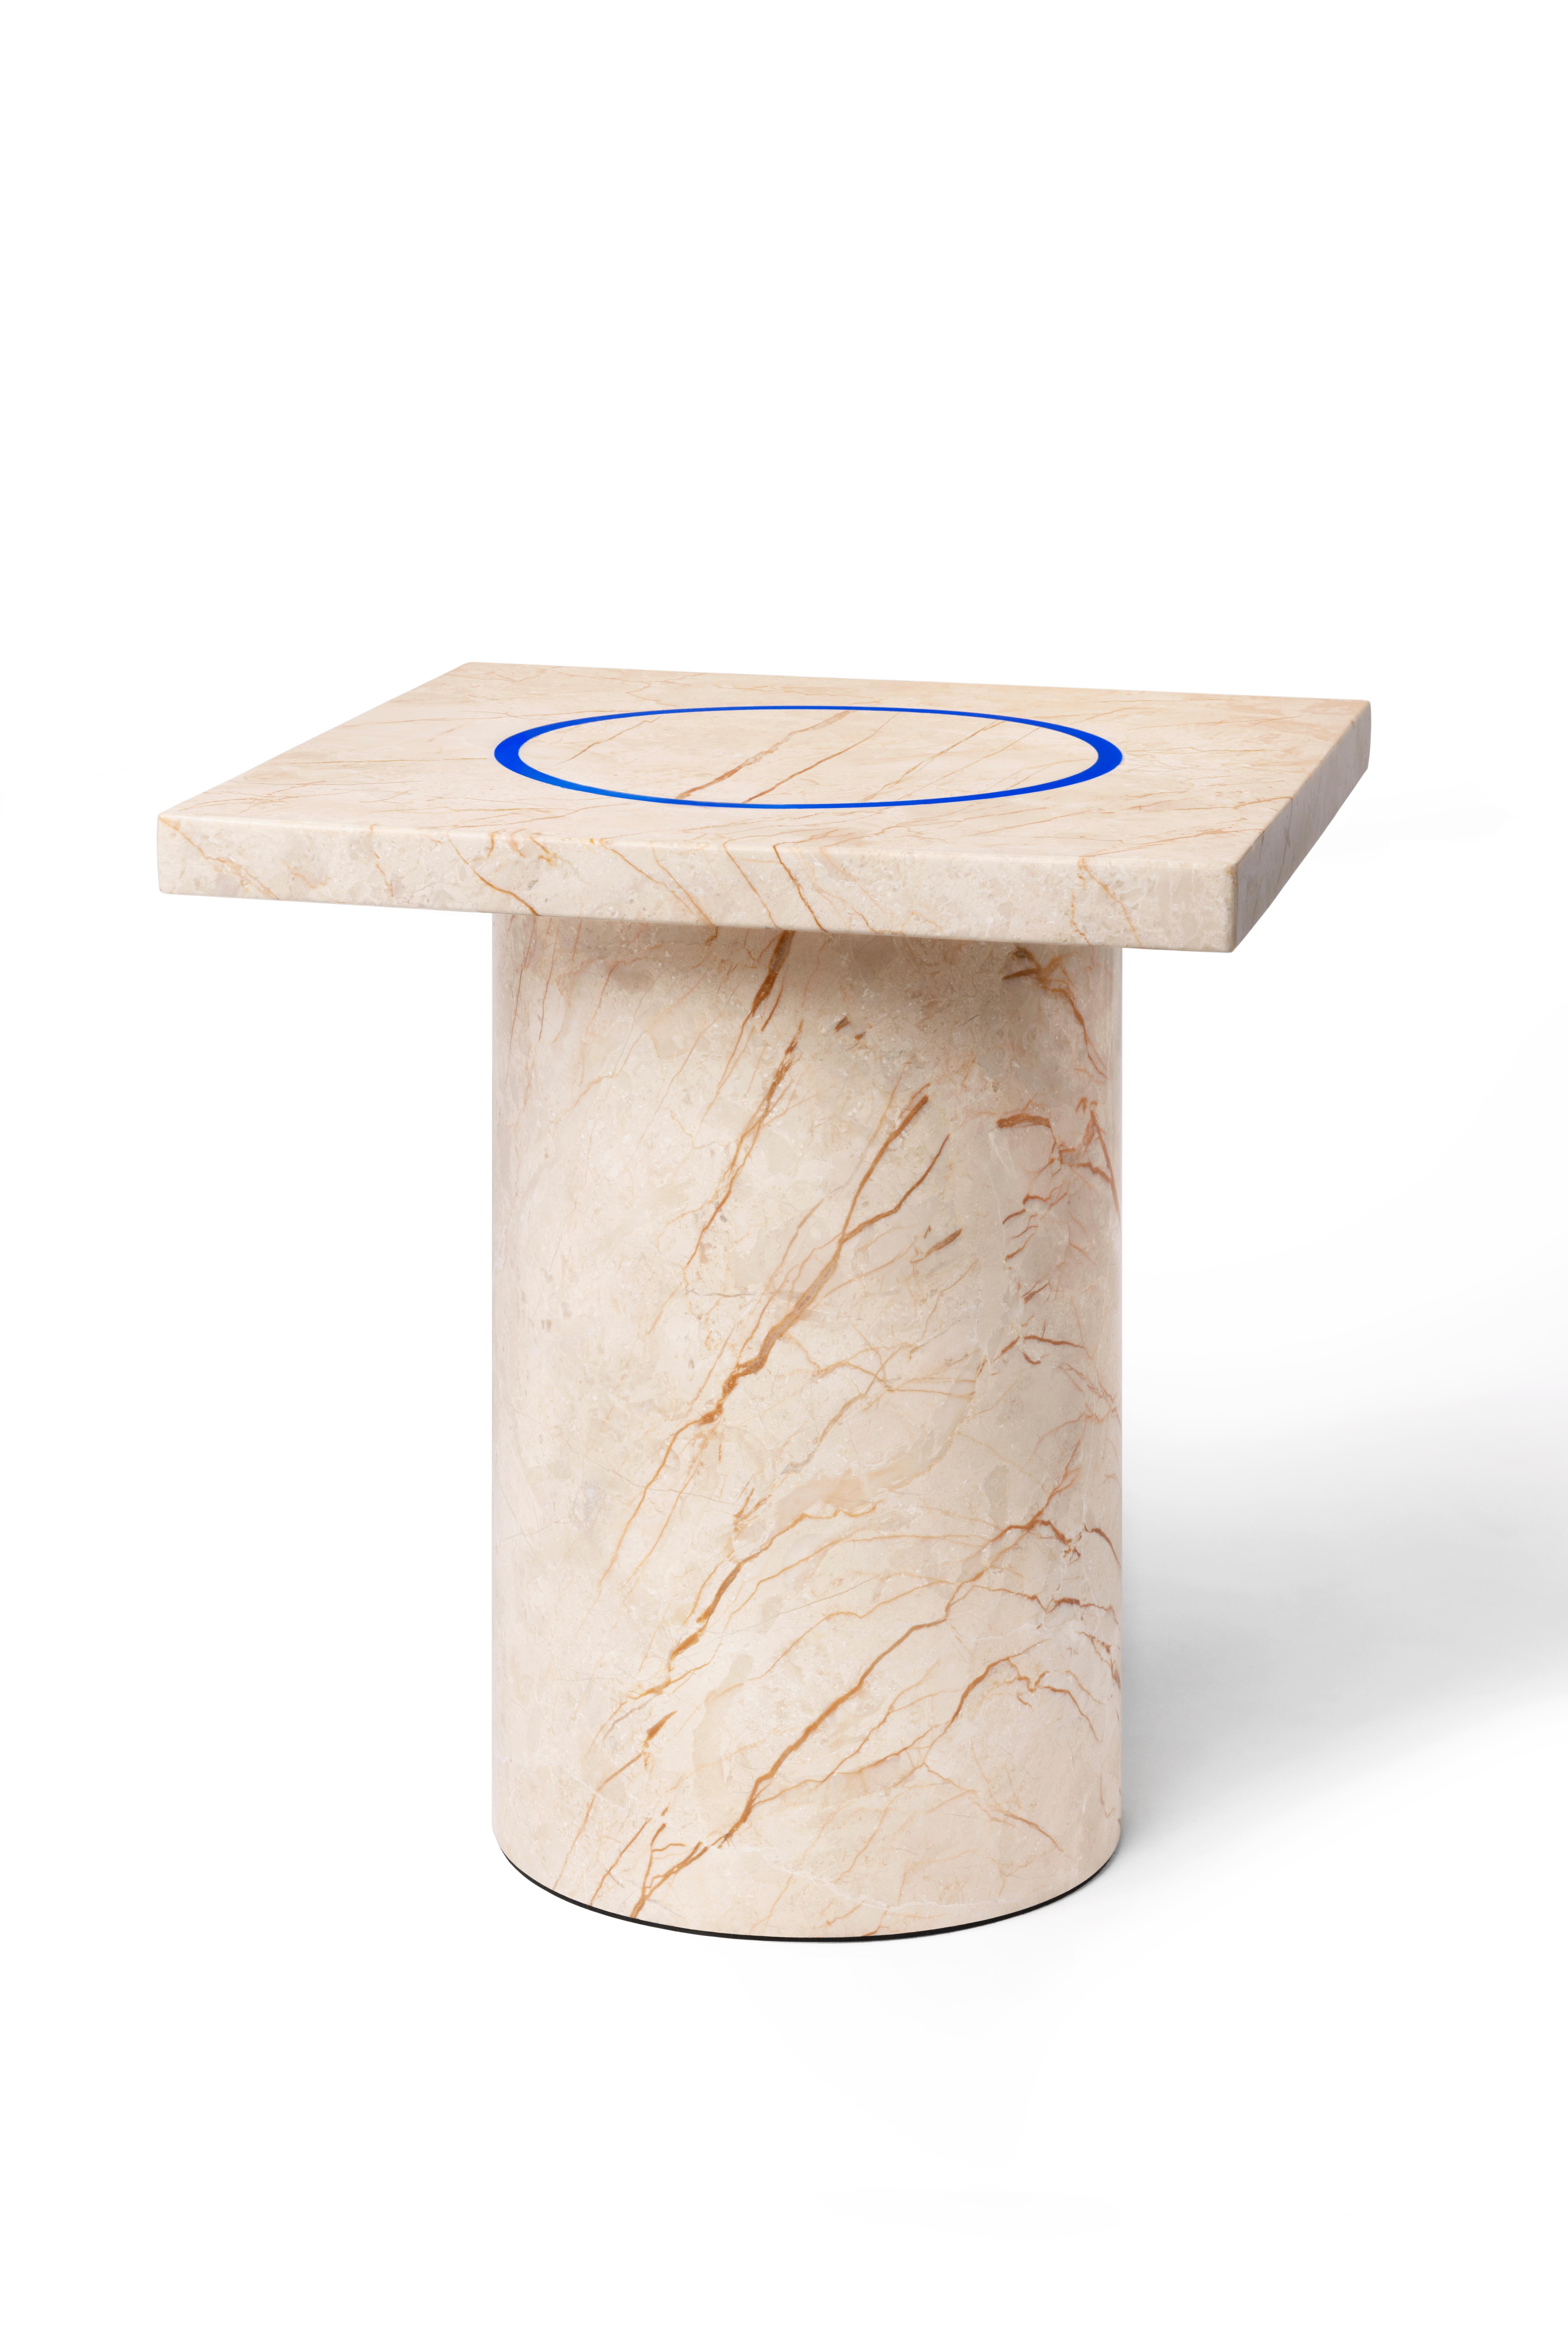 Acrylic Menes Gold Square Side Table from Dislocation by Studio Buzao